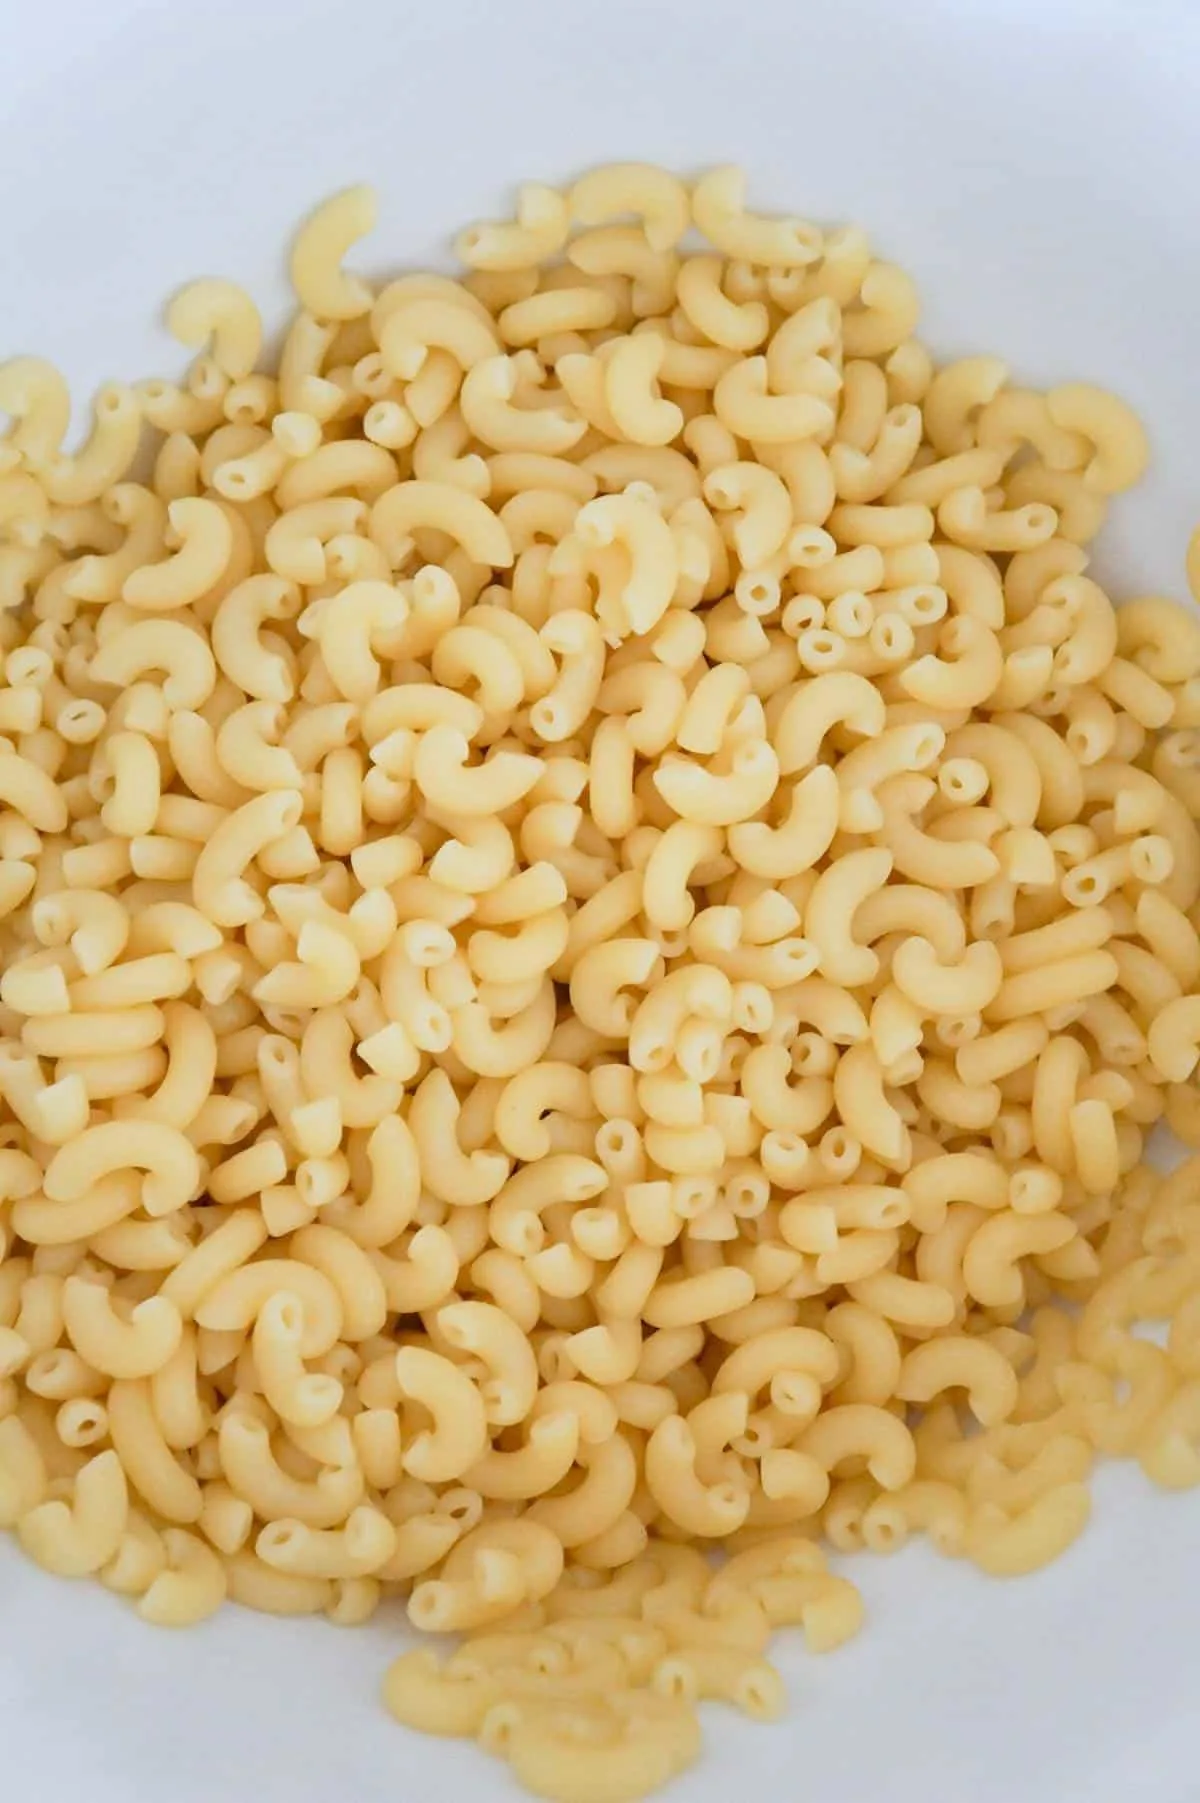 cooked macaroni noodles in a mixing bowl